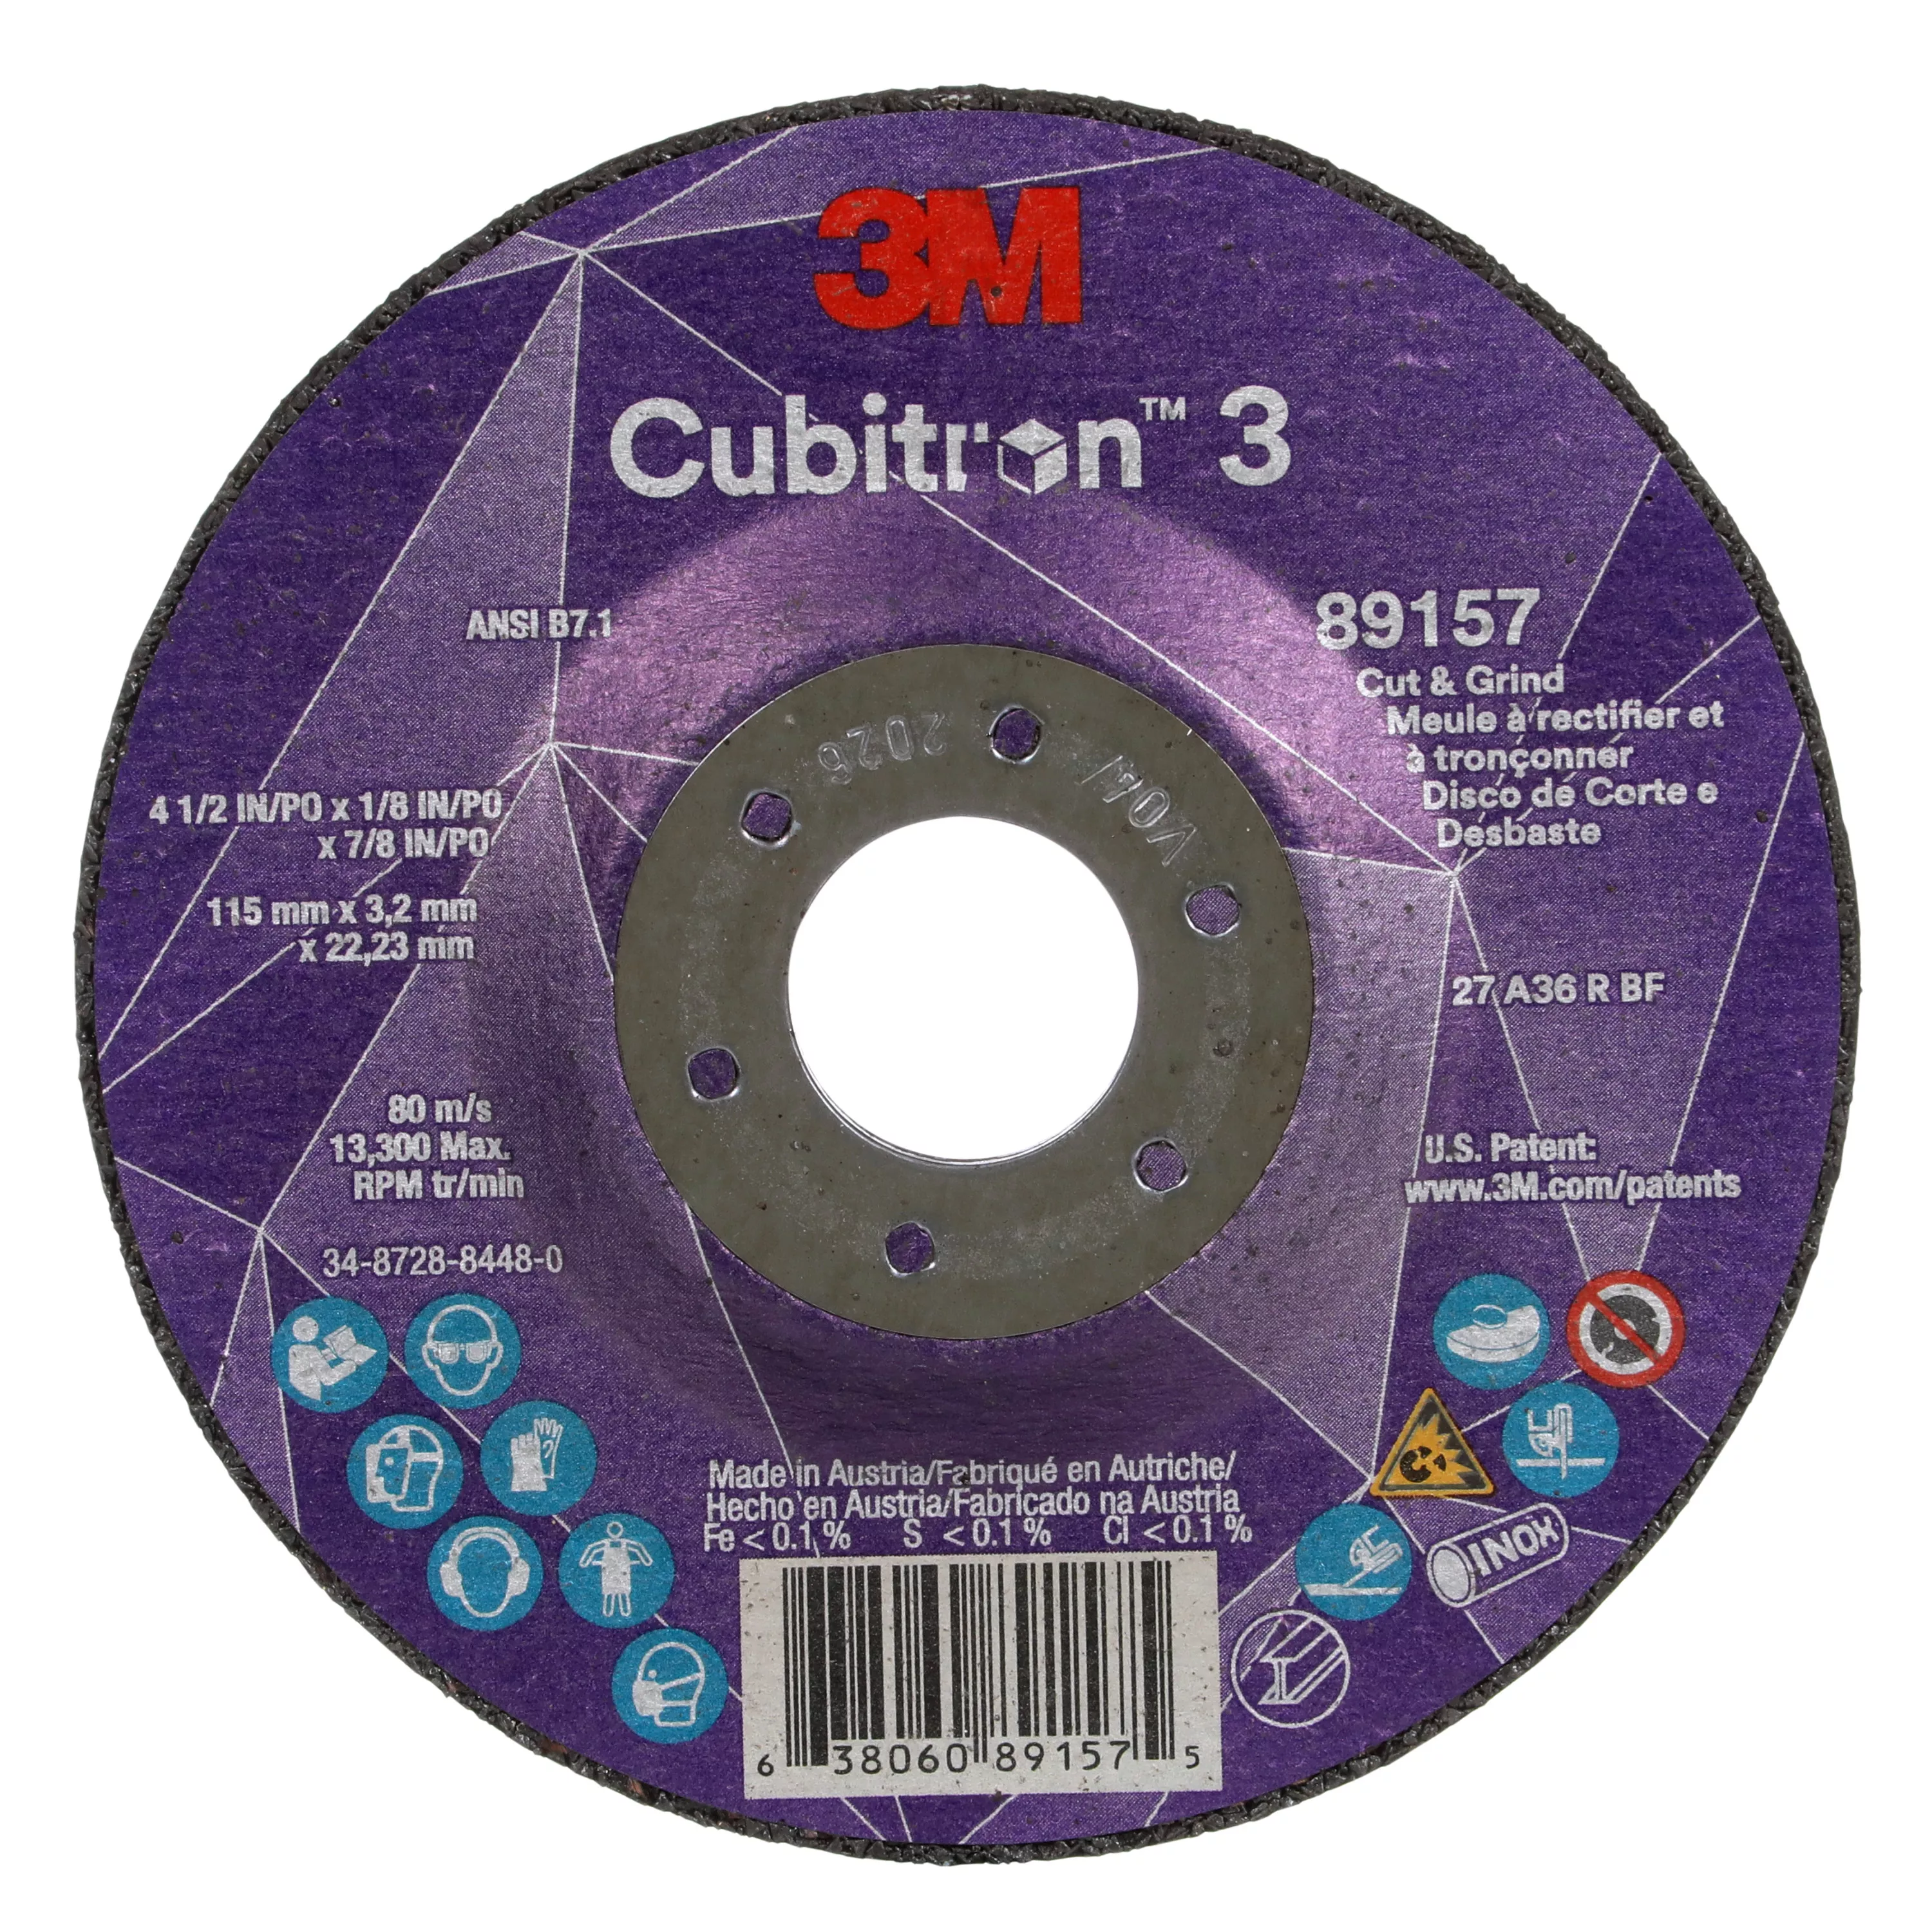 3M™ Cubitron™ 3 Cut and Grind Wheel, 89157, 36+, T27, 4-1/2 in x 1/8 in
x 7/8 in (115 x 3.2 x 22.23 mm), ANSI, 10/Pack, 20 ea/Case